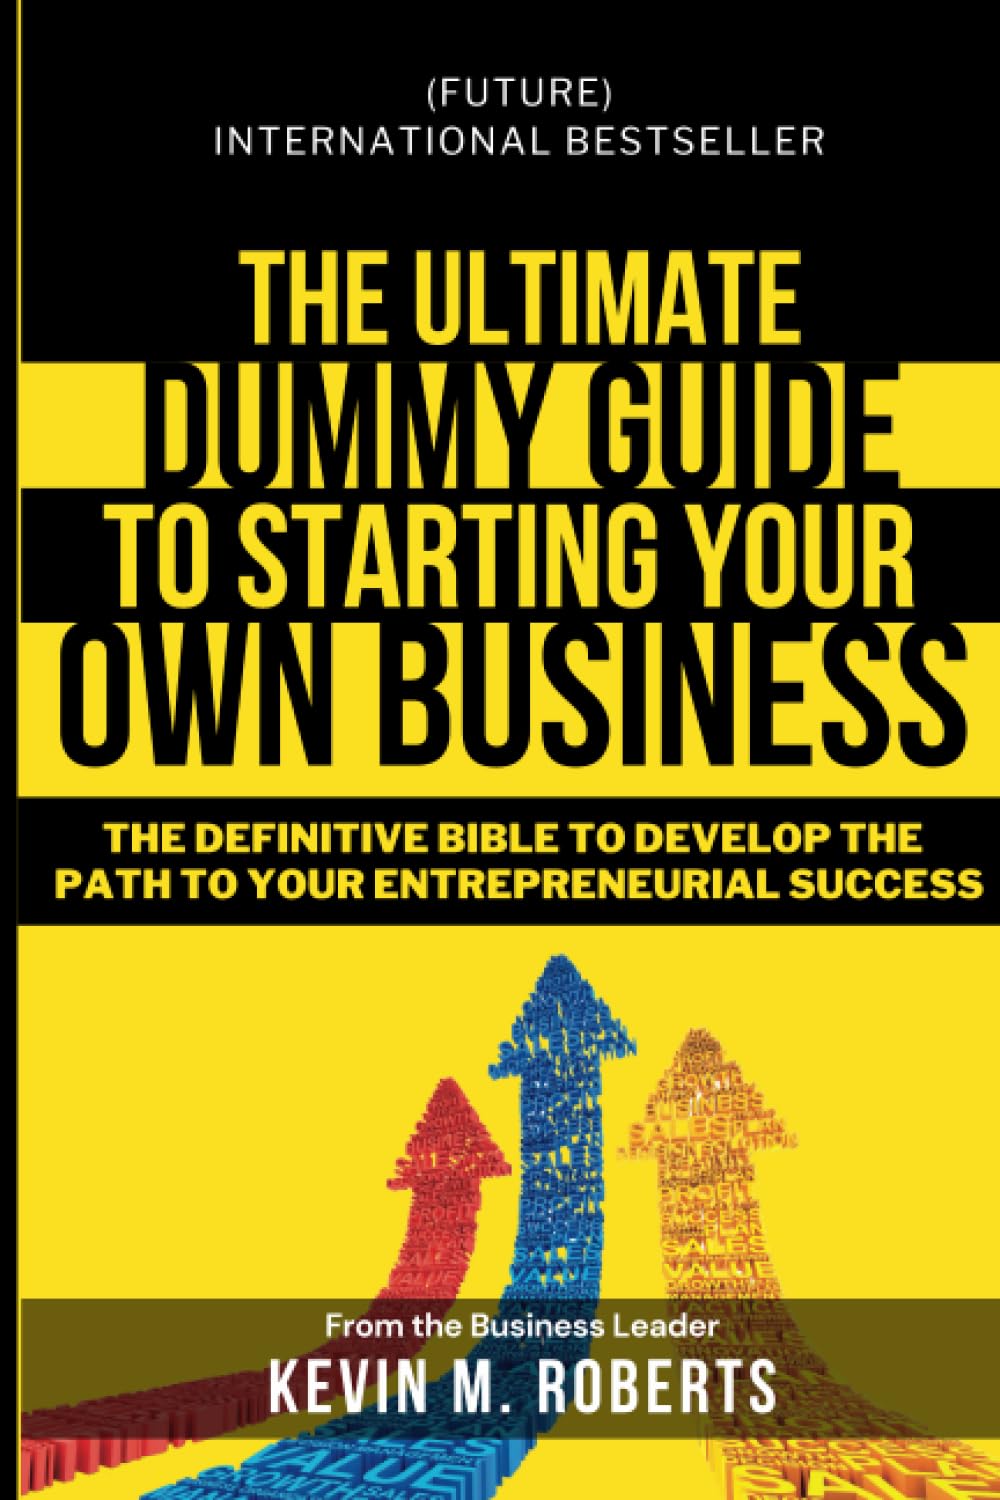 The Ultimate Dummy Guide to Starting Your Own Business